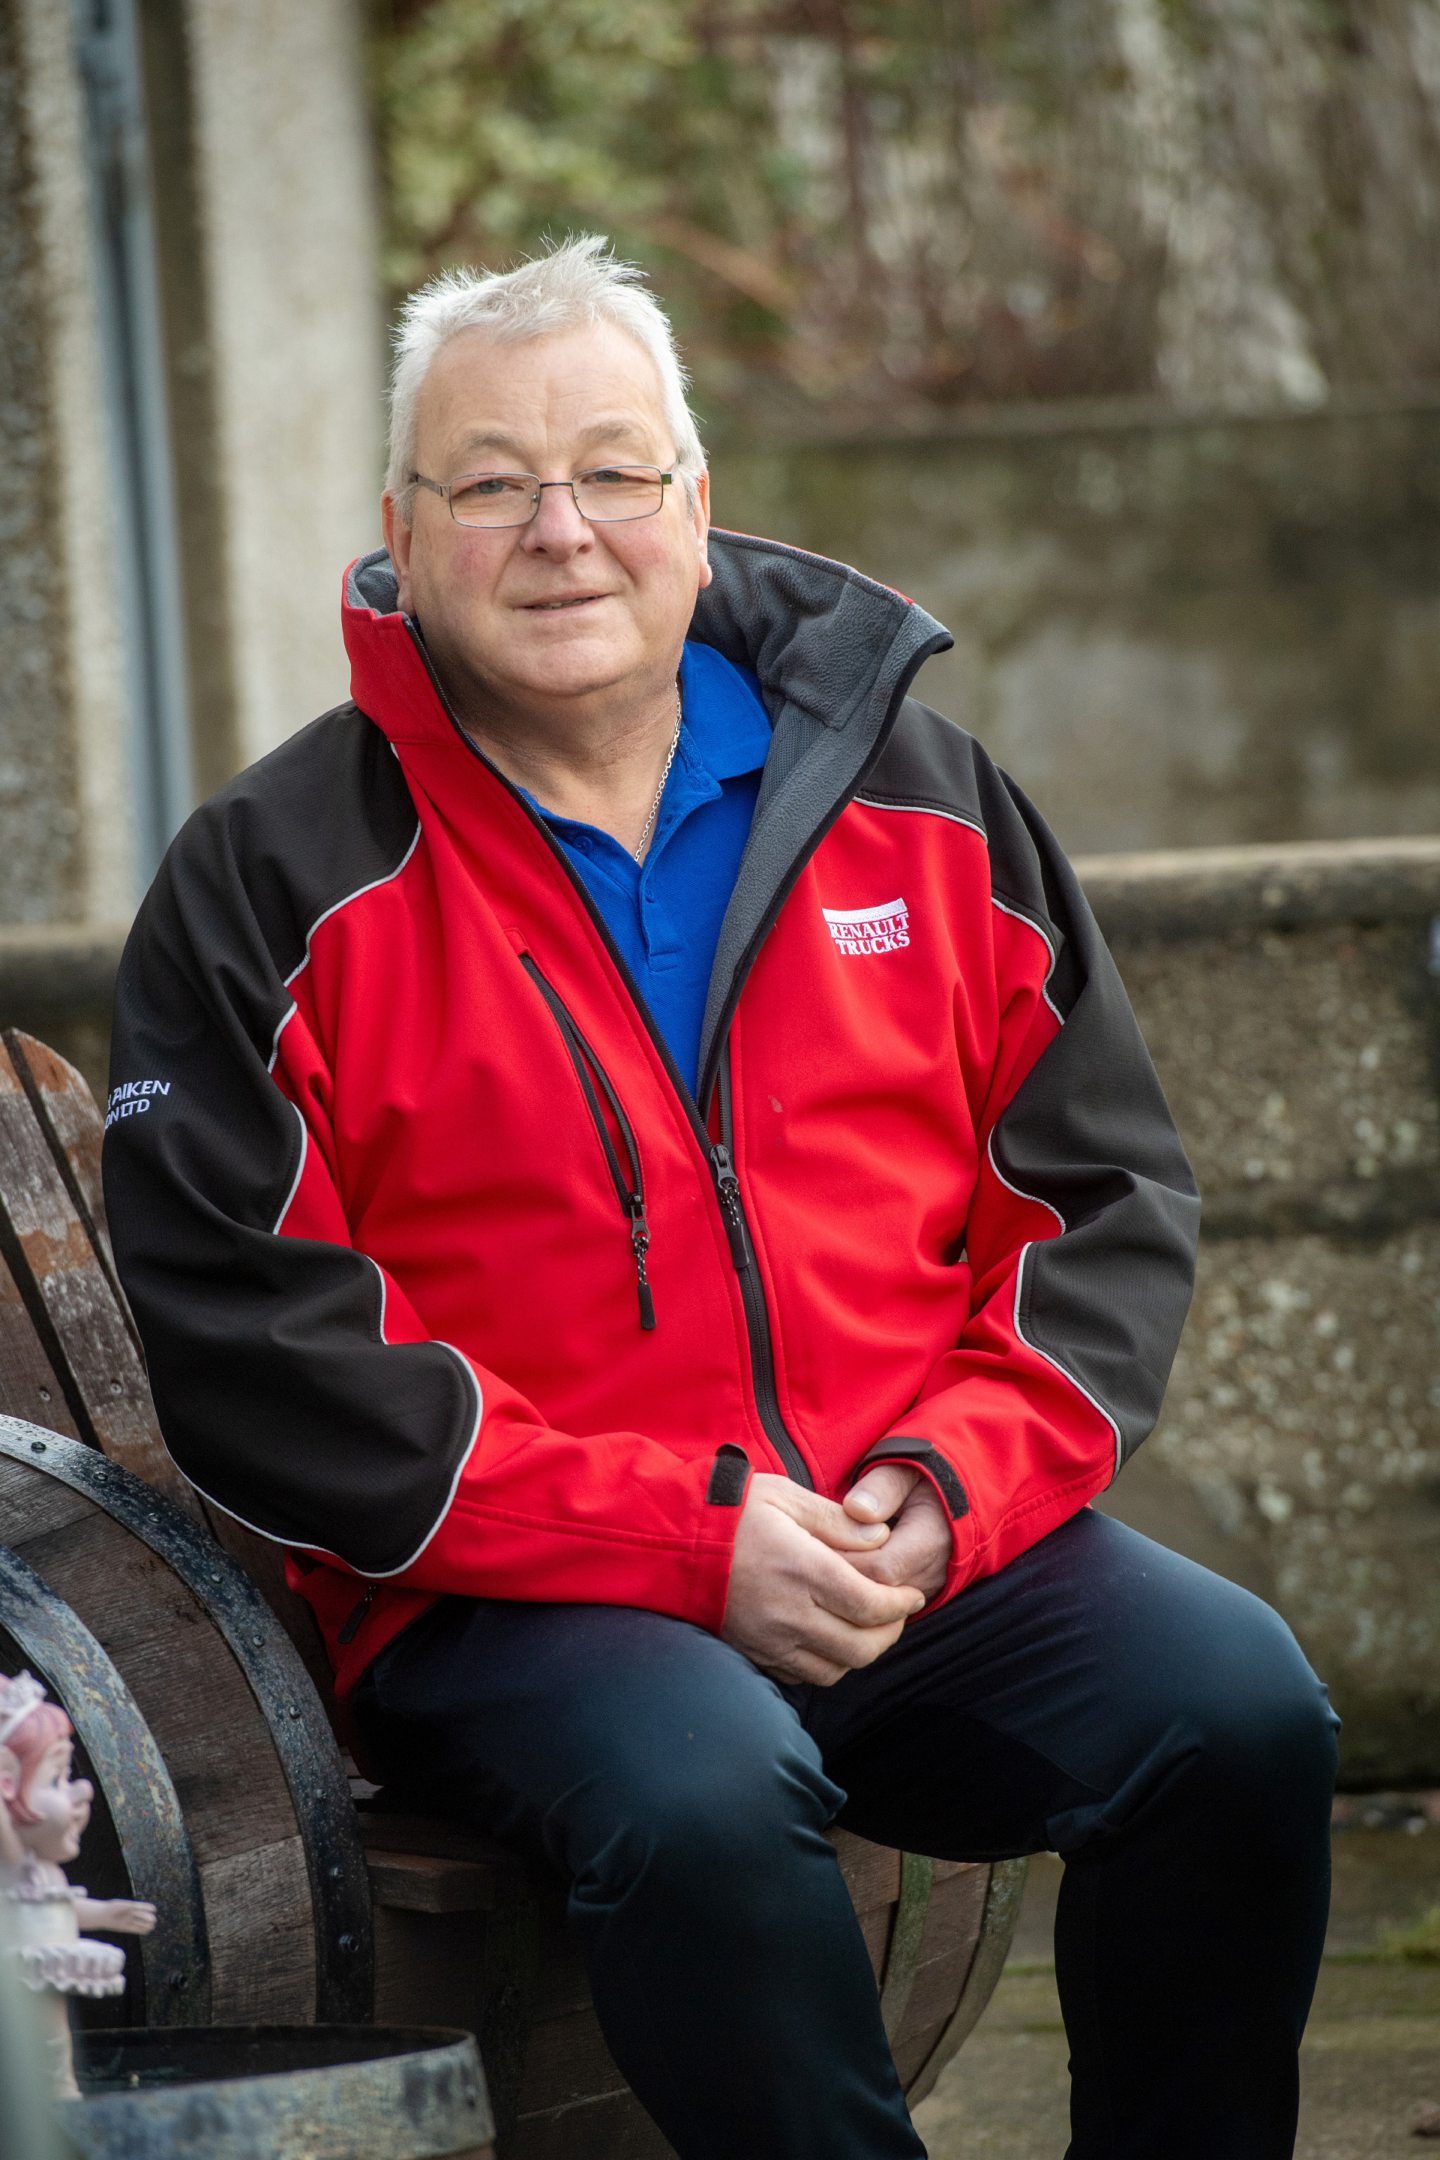 A portrait photo of Tommy sitting on his own in Fraserburgh.